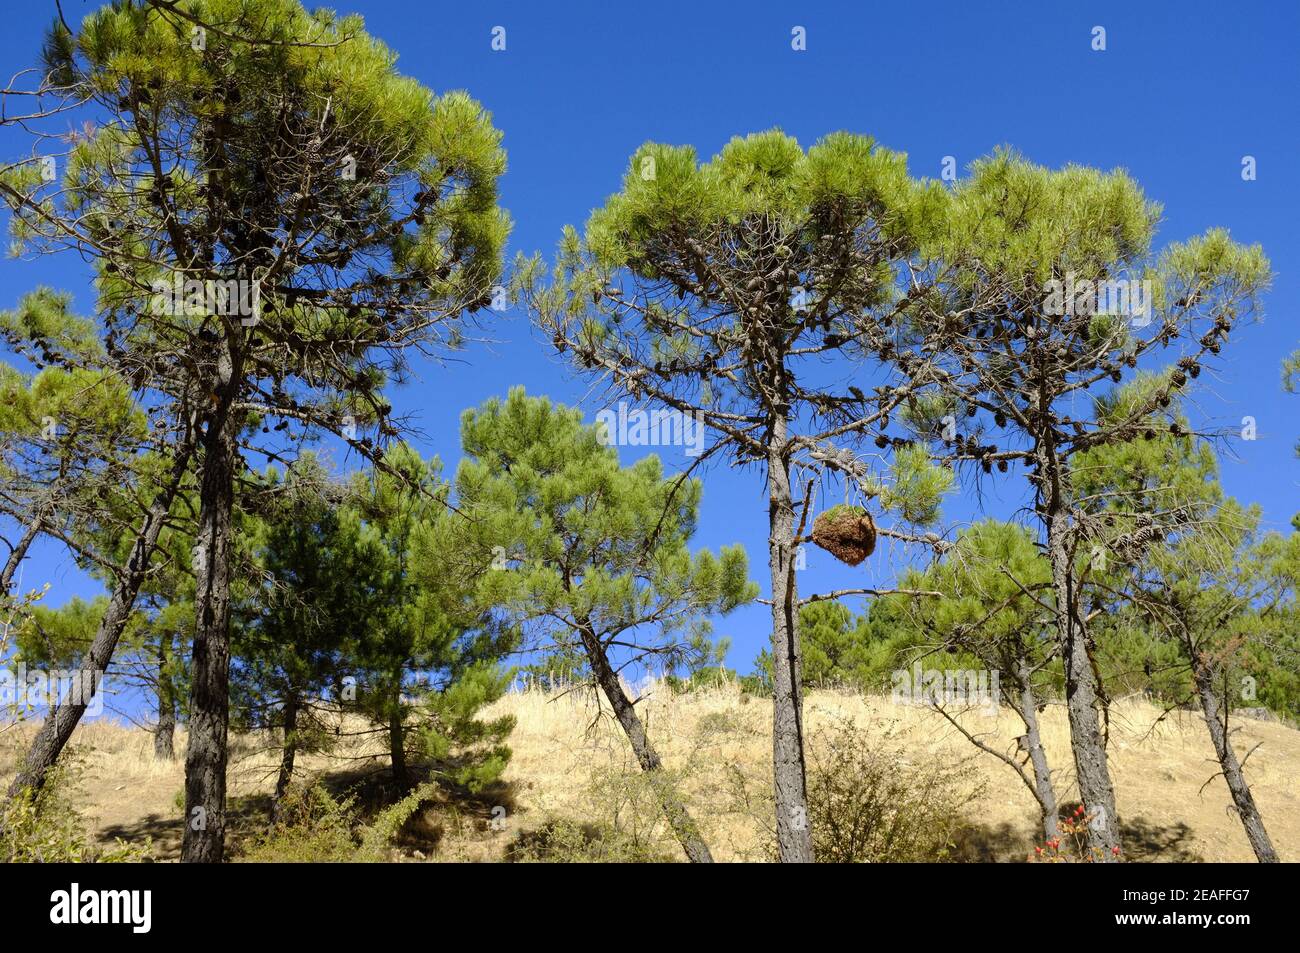 Witches Broom growths on Mediterranean pine trees. Sierras de las Nieves, Malaga Province, Andalucia, Spain Stock Photo